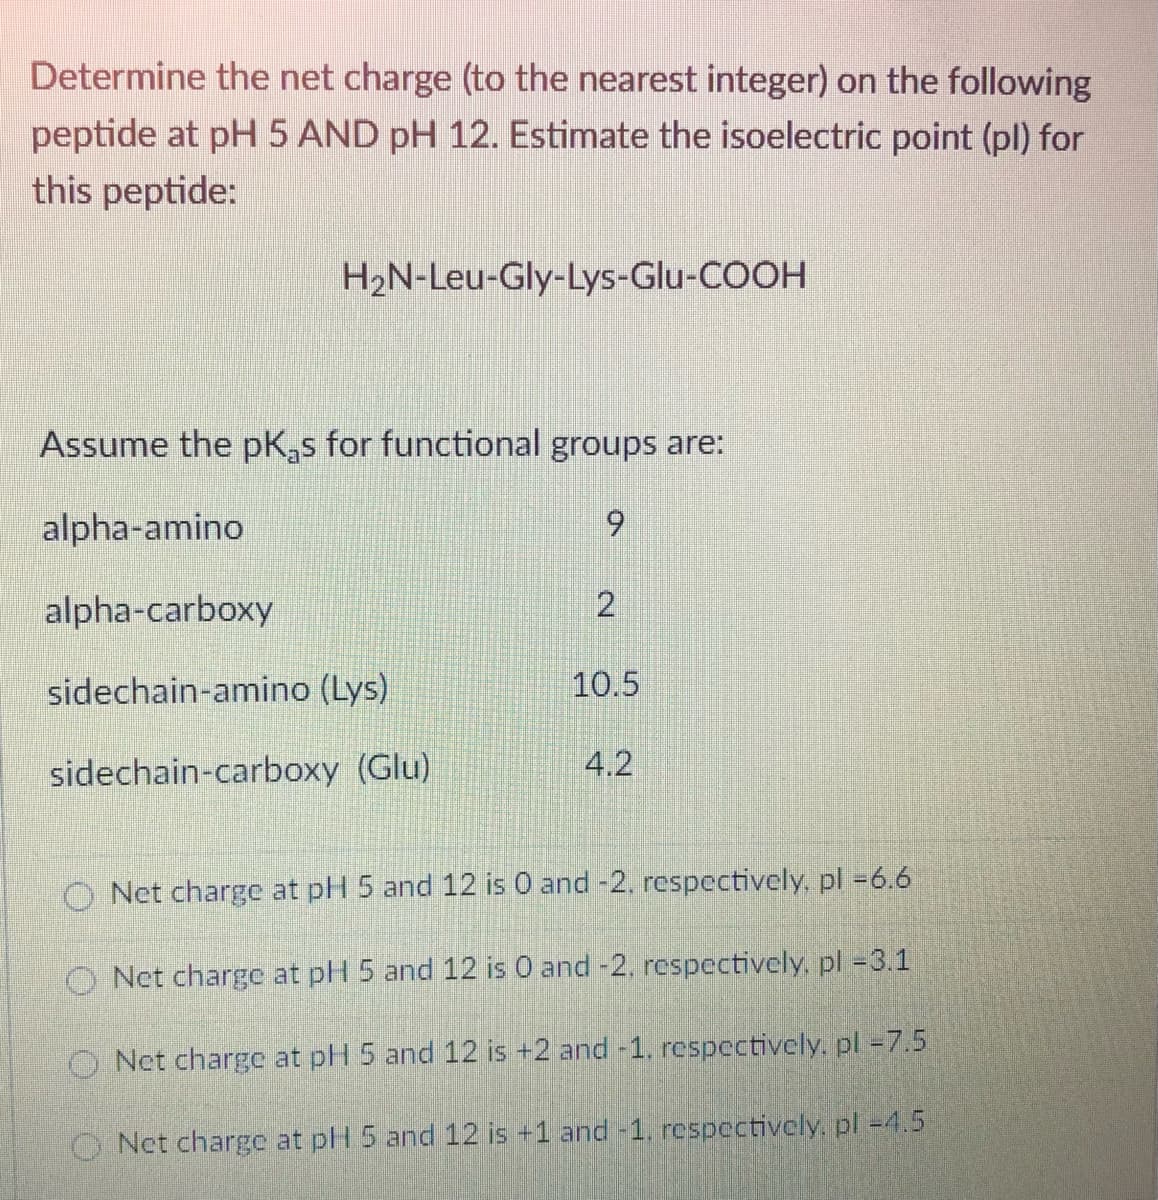 Determine the net charge (to the nearest integer) on the following
peptide at pH 5 AND pH 12. Estimate the isoelectric point (pl) for
this peptide:
H2N-Leu-Gly-Lys-Glu-COOH
Assume the pK,s for functional groups are:
alpha-amino
6.
alpha-carboxy
sidechain-amino (Lys)
10.5
sidechain-carboxy (Glu)
4.2
O Net charge at pH 5 and 12 is 0 and -2, respectively, pl =6.6
O Net charge at pH 5 and 12 is 0 and -2, respectively, pl =3.1
O Net charge at plH 5 and 12 is +2 and -1, respectively, pl =7.5
O Nct charge at pH 5 and 12 is +1 and -1. respectively,. pl -4.5
2.
